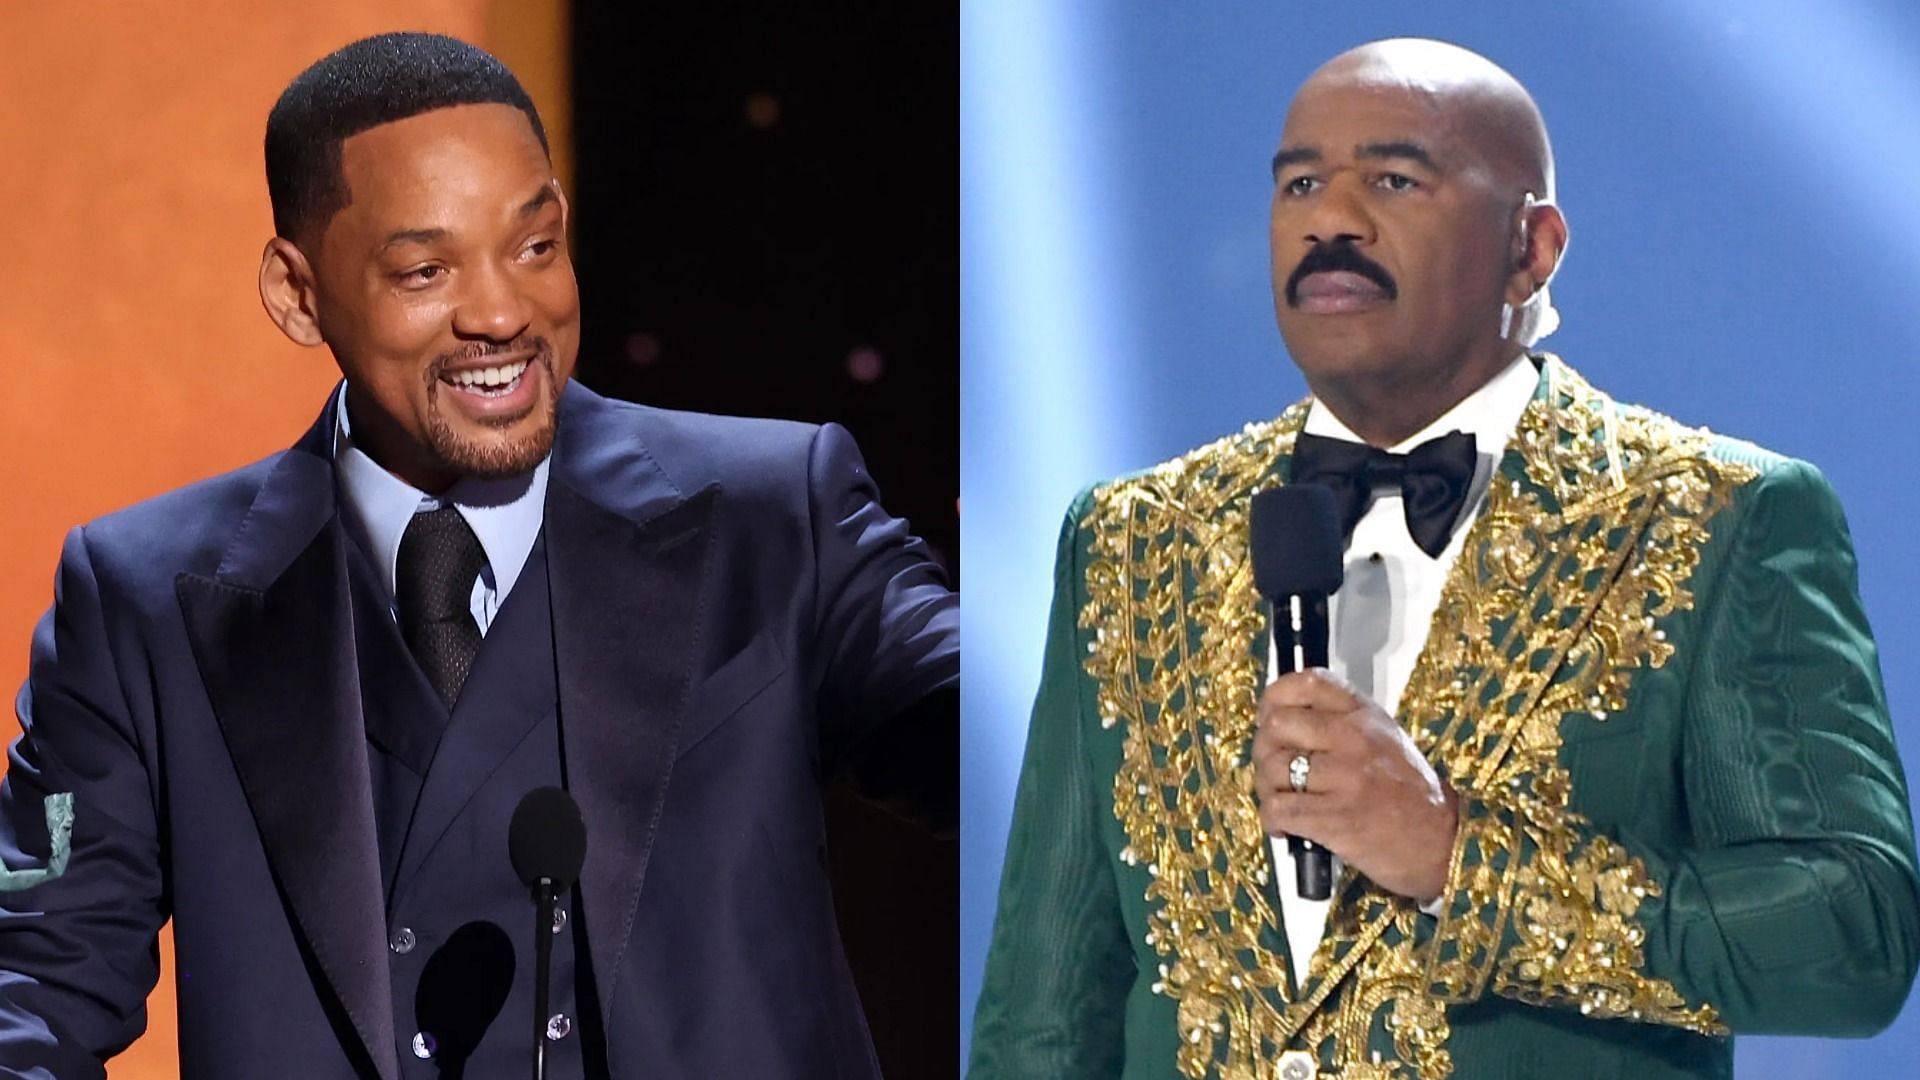 Steve Harvey said that he has lost a lot of respect for Will Smith after his infamous Oscars incident (Image via Getty Images/Paras Griffin/Rich Fury)